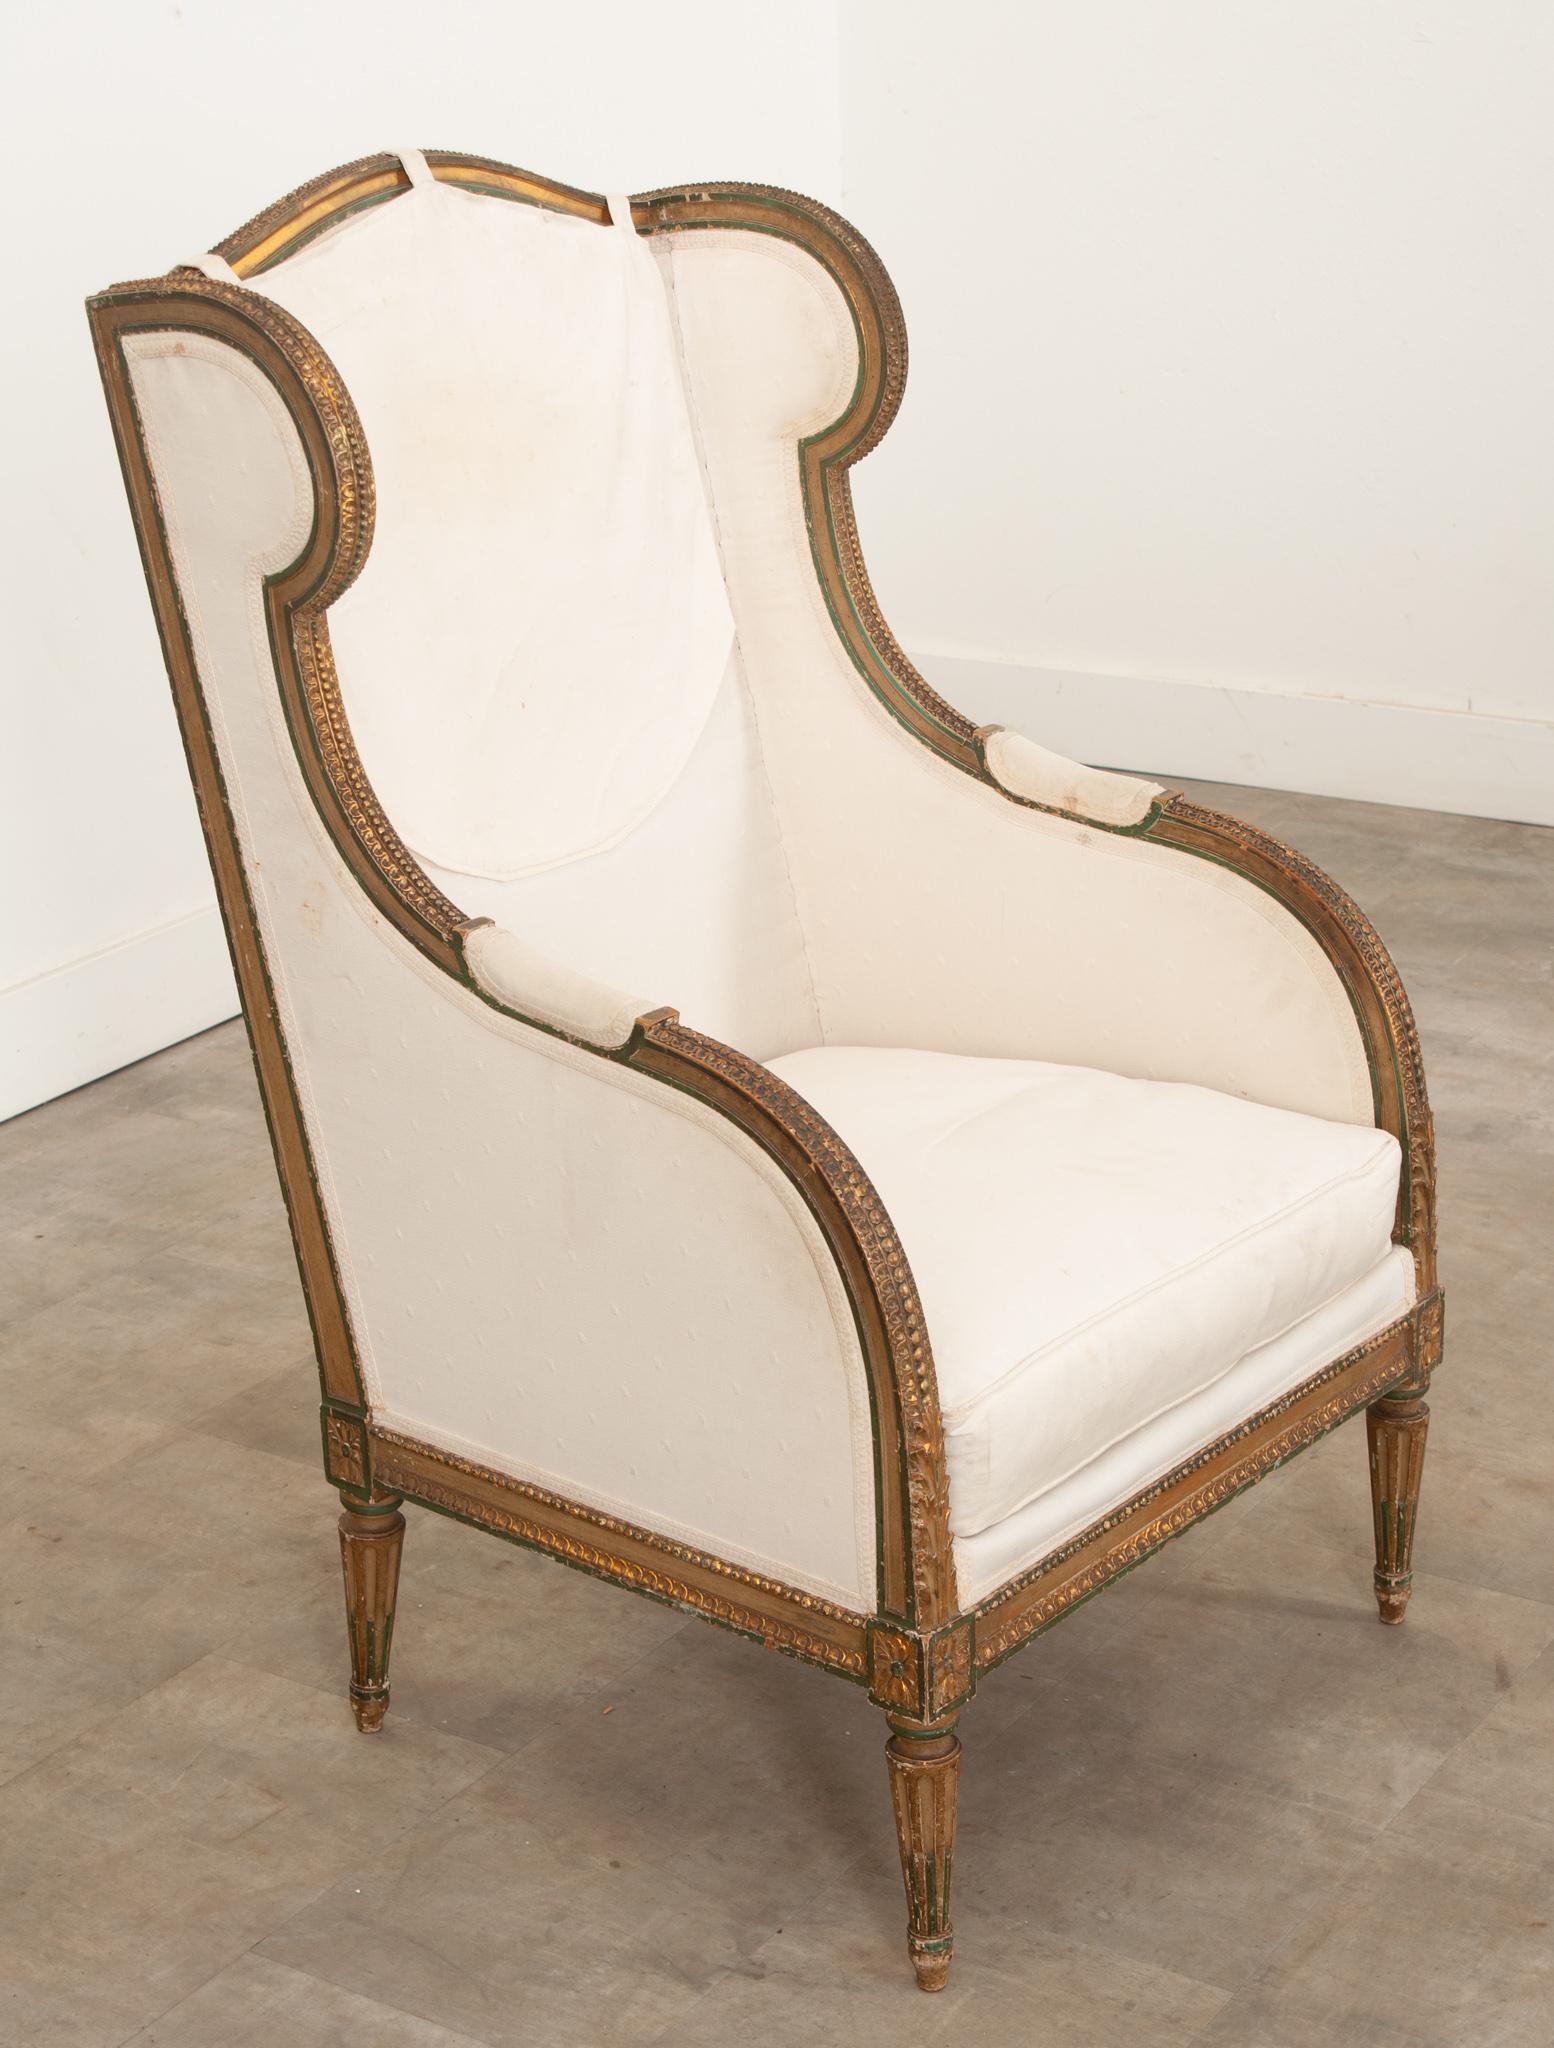 A French Louis XVI style carved and painted bergère à oreilles circa 1860 featuring charming details and vintage upholstery.  Elegant and eye-catching  this chair is as much a conversation piece as it is a comfortable seat. The bergère's upper rail